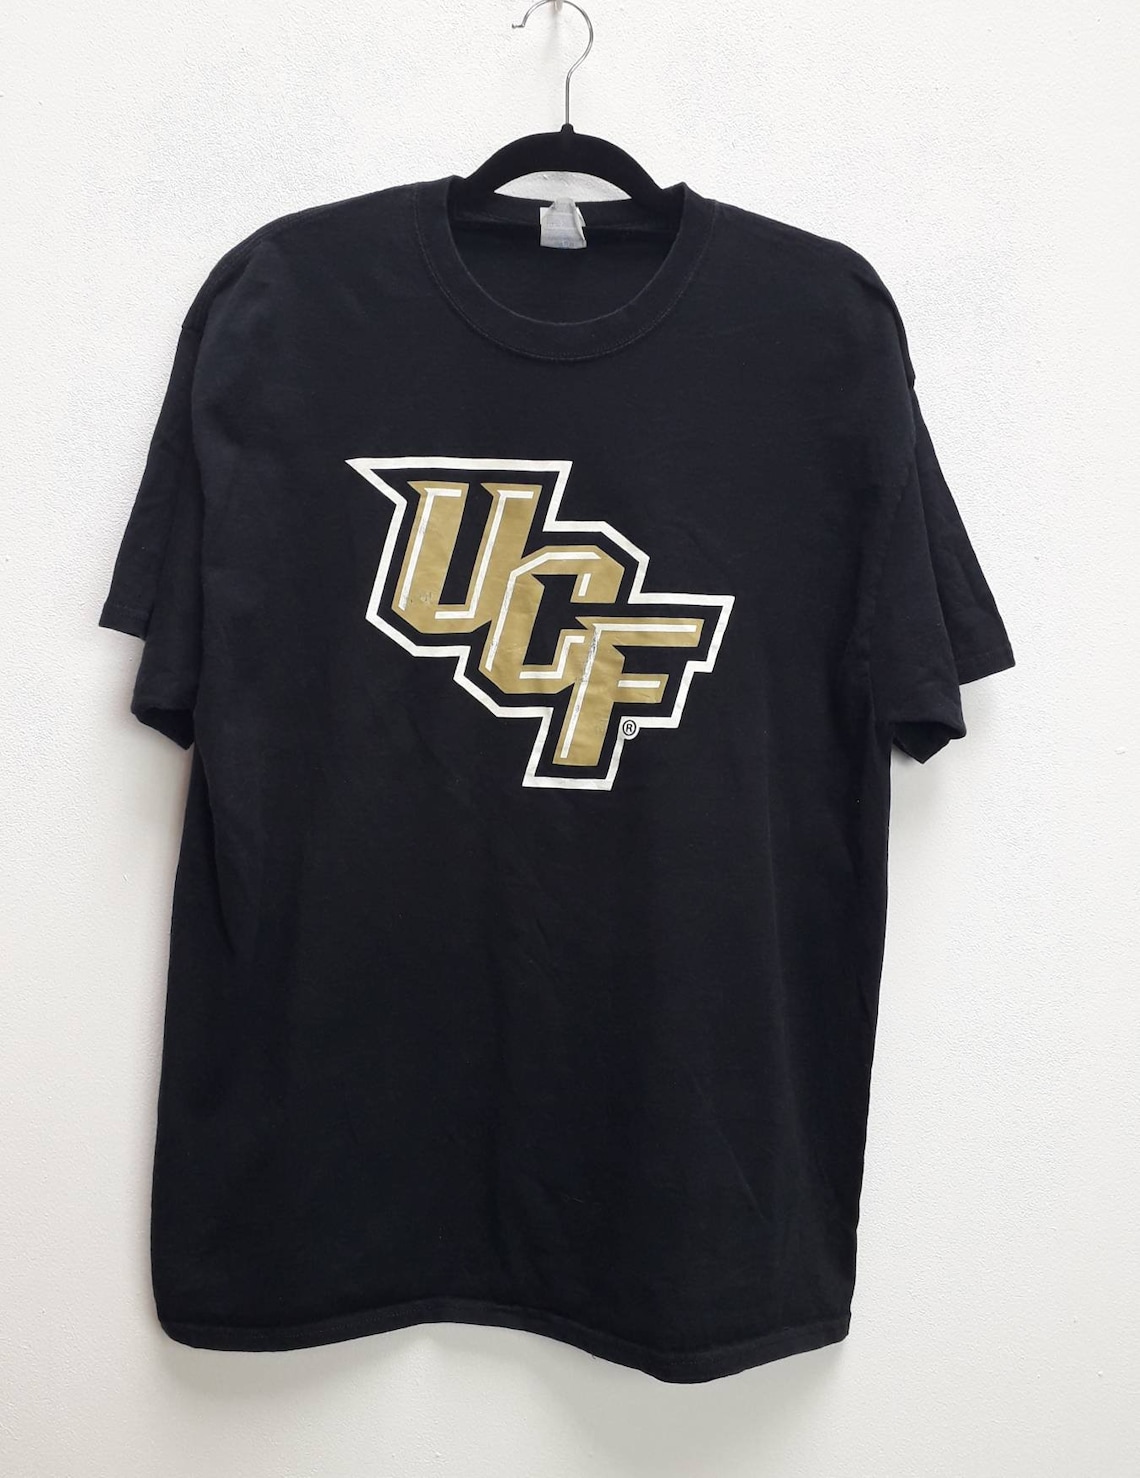 UCF T-shirt Vintage Black College T Shirt Oversize Graphic Tee - Etsy